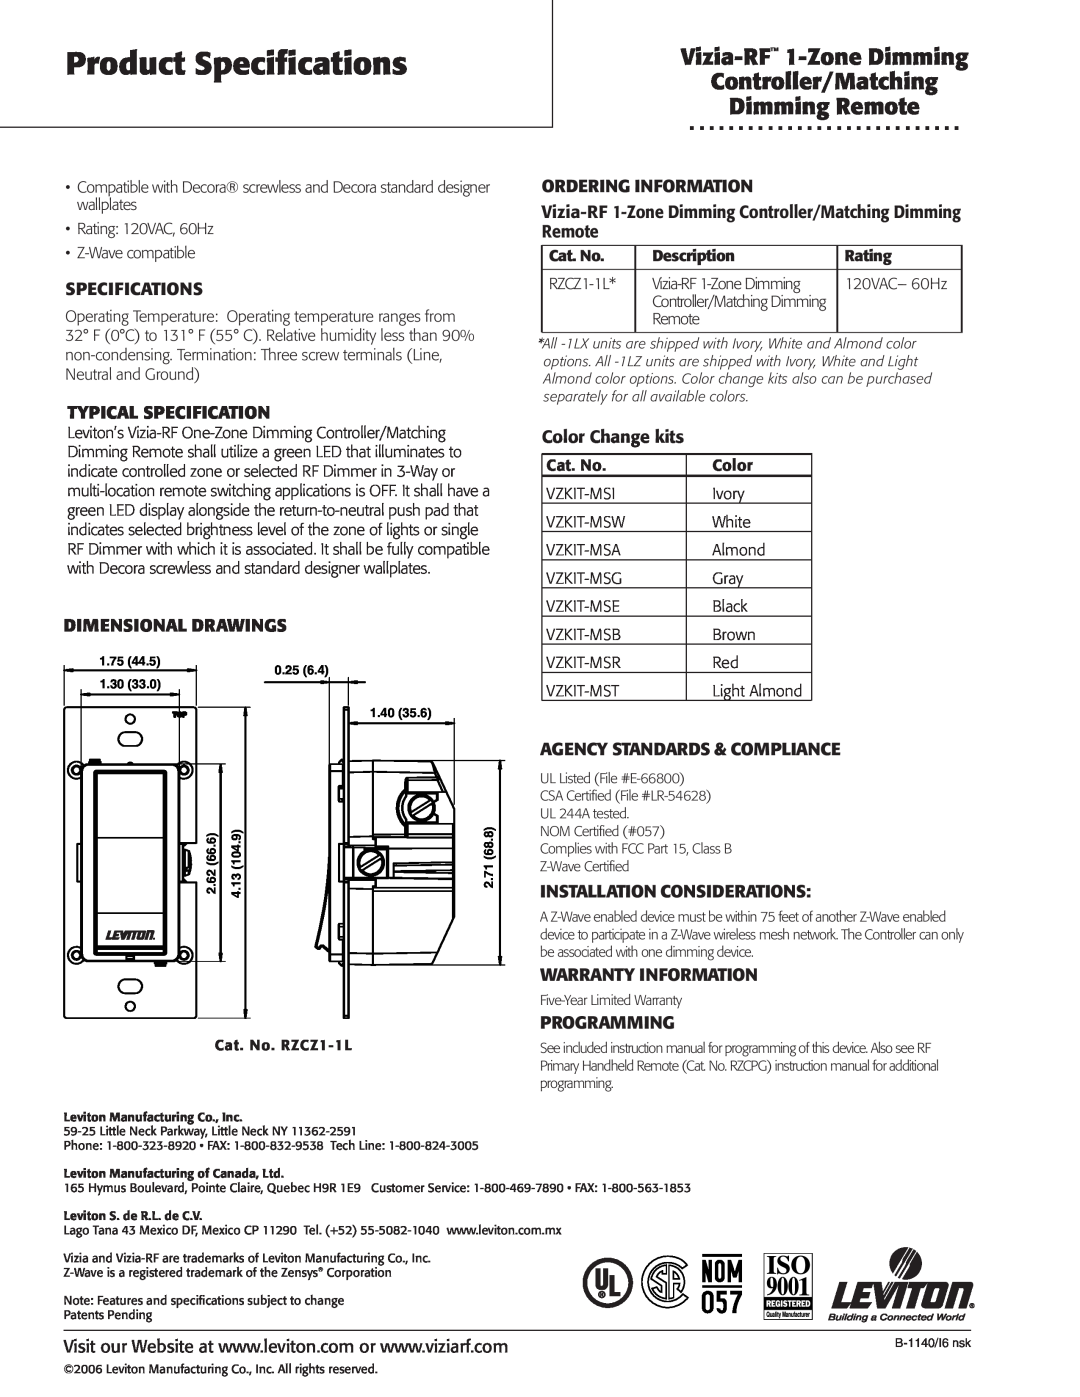 Leviton LE-RZCZ Product Specifications, Typical Specification, Ordering Information, Dimensional Drawings, Programming 